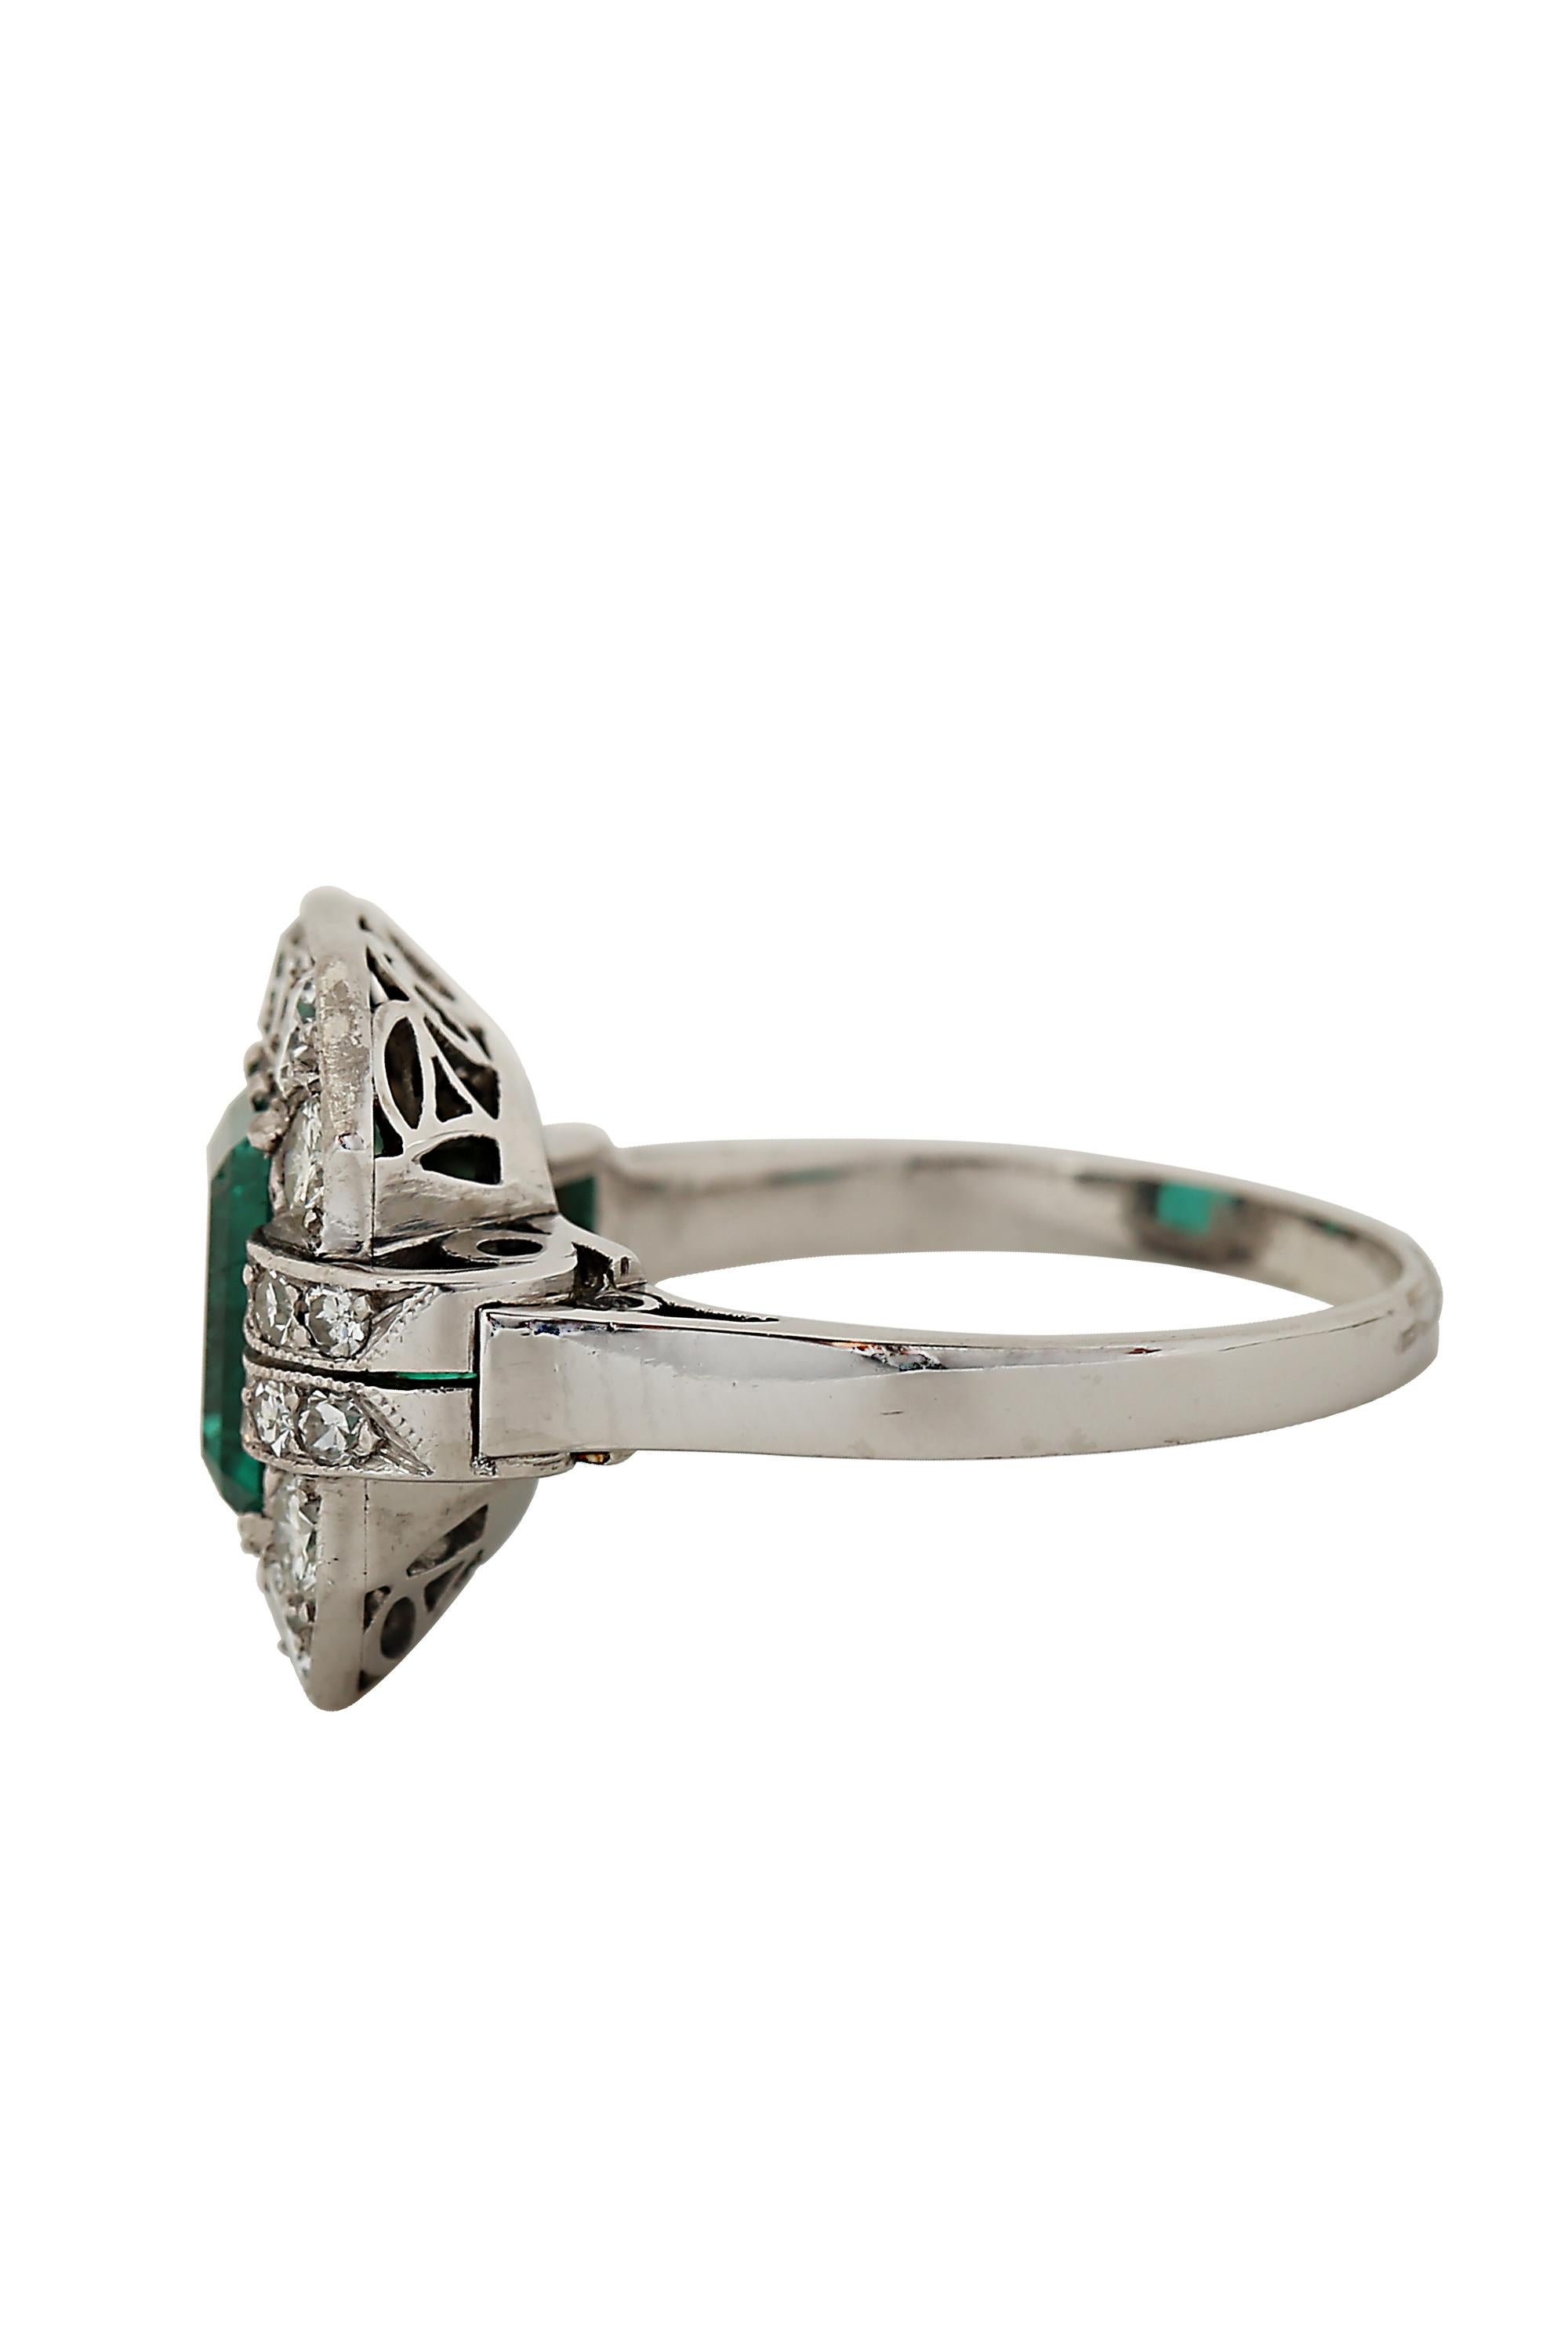 Octagon Cut GIA Certified Art Deco Colombian Emerald and Diamond Ring For Sale